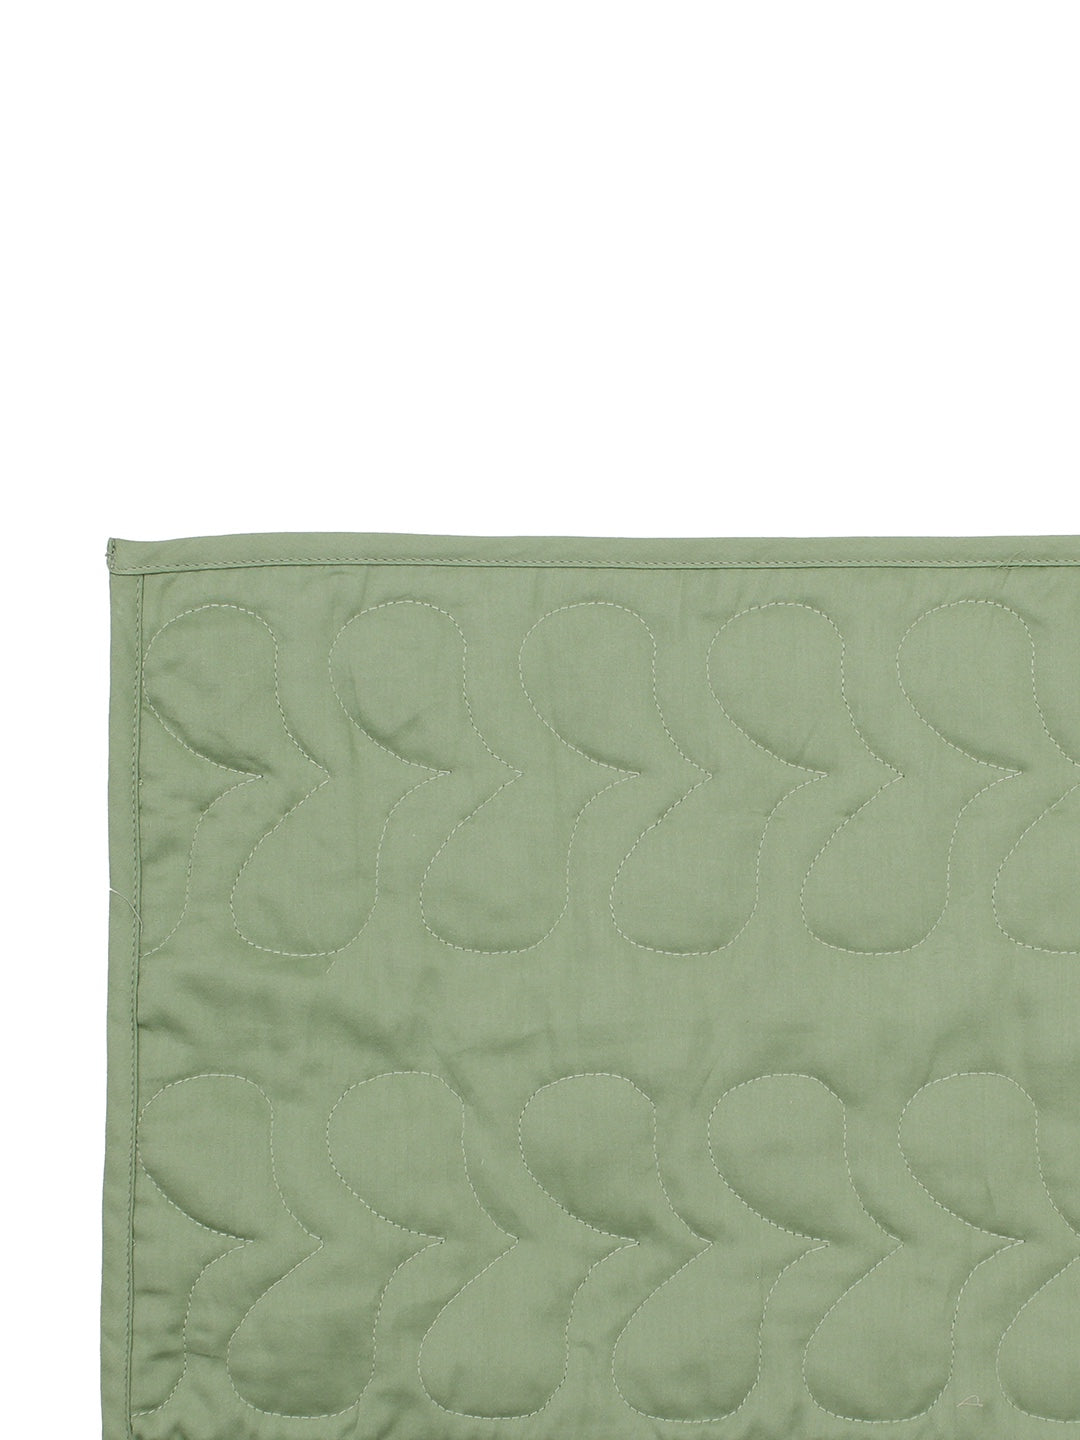 Cotton Table Placemat - Satsar with quilted